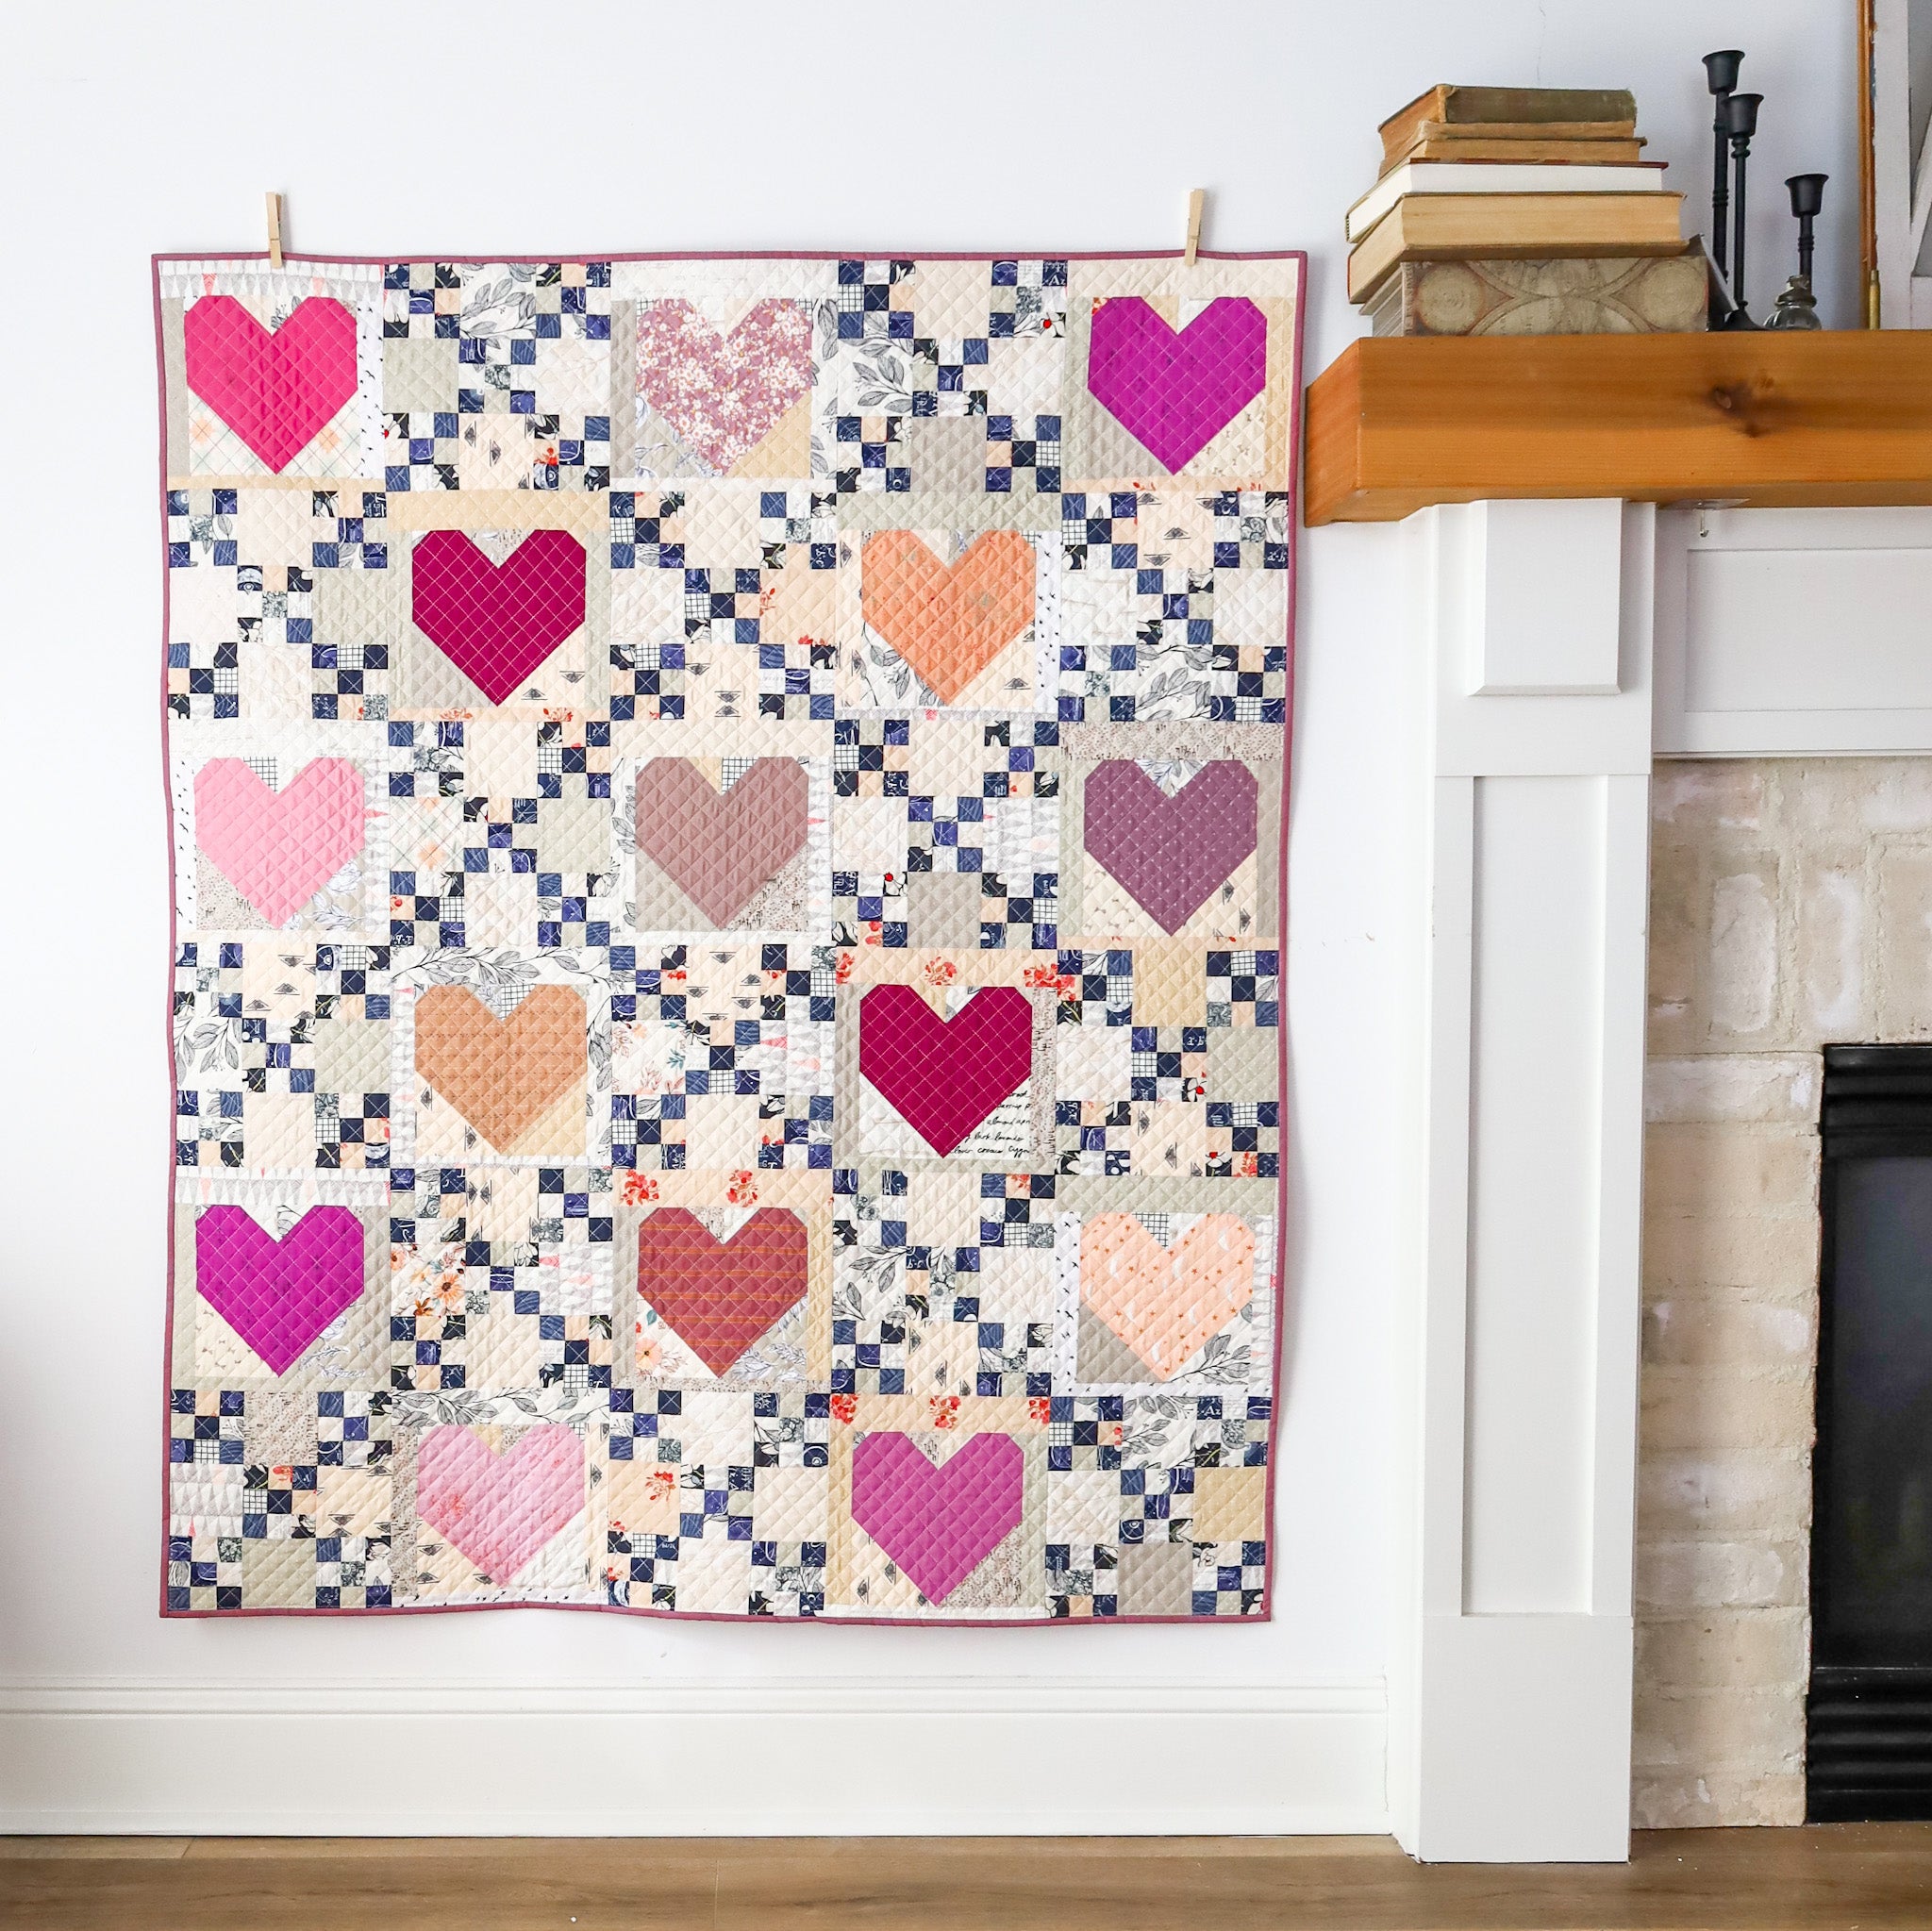 Heirloom Hearts Quilt - the Scrappy version